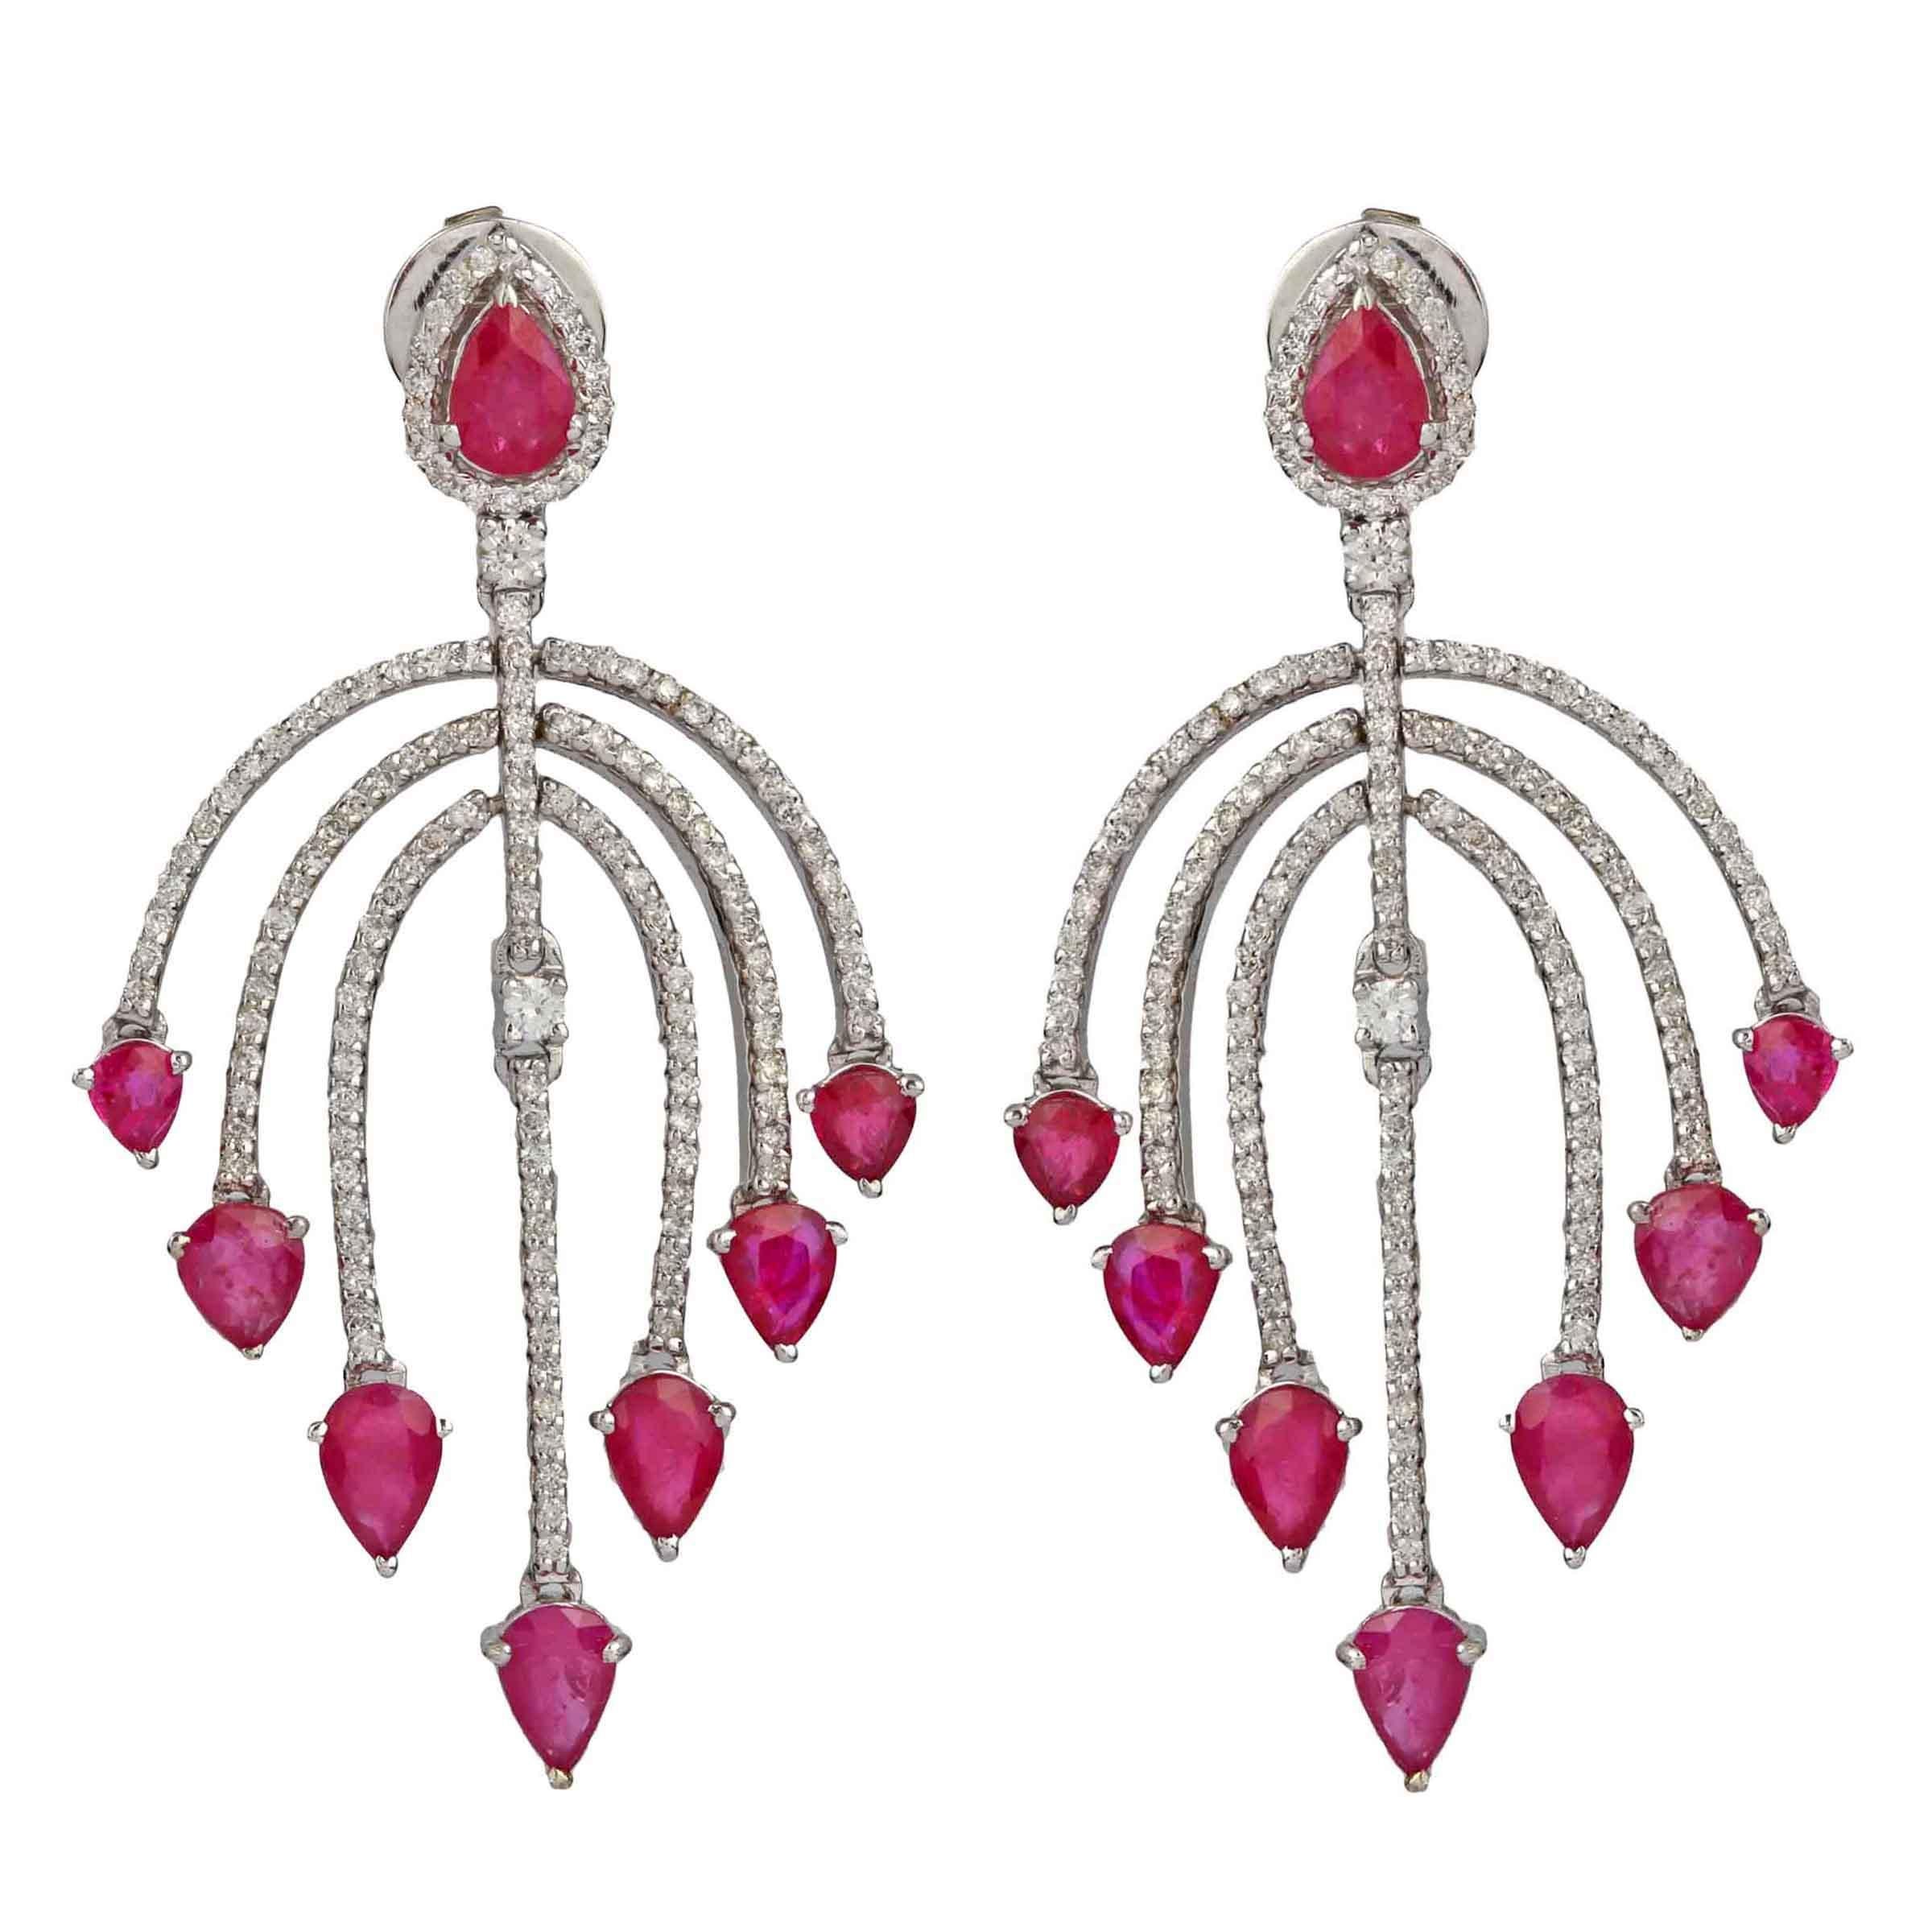  18K Solid Yellow Gold and Natural Diamond (G-H Color, SI1-SI2 Purity) with Ruby Gemstone, these earrings promise timeless appeal and lasting impressions. A timeless, luxurious yet delicate piece that will make its wearer